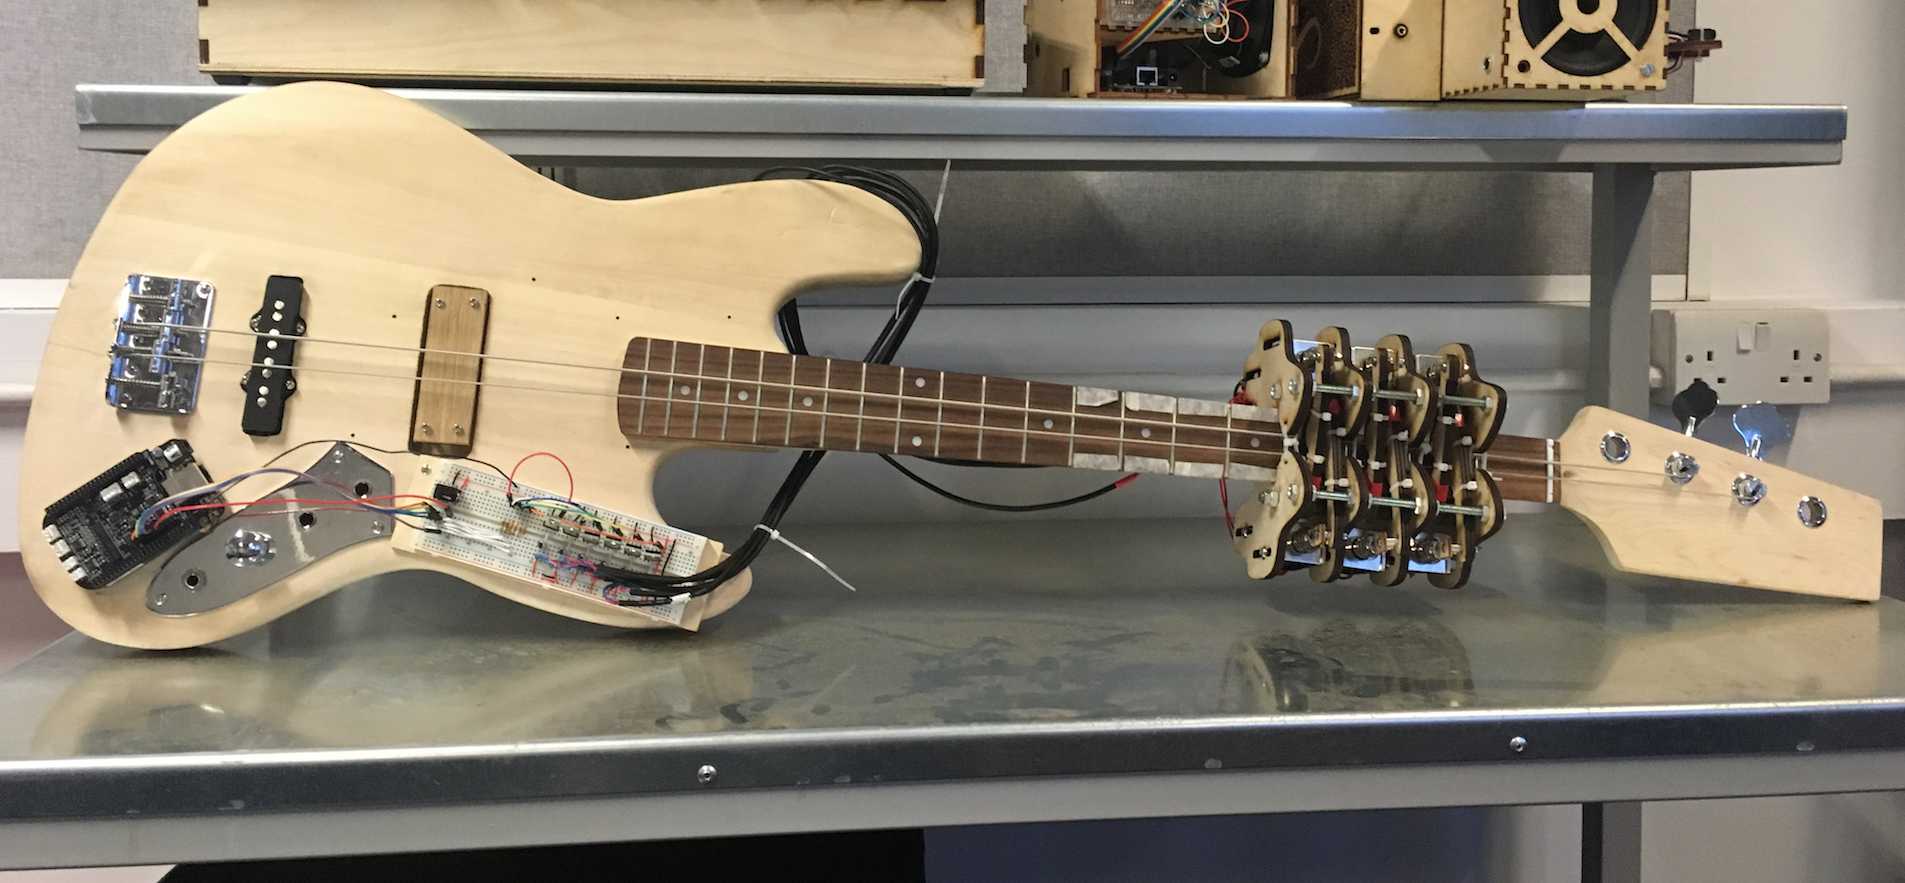 Making the one-handed bass